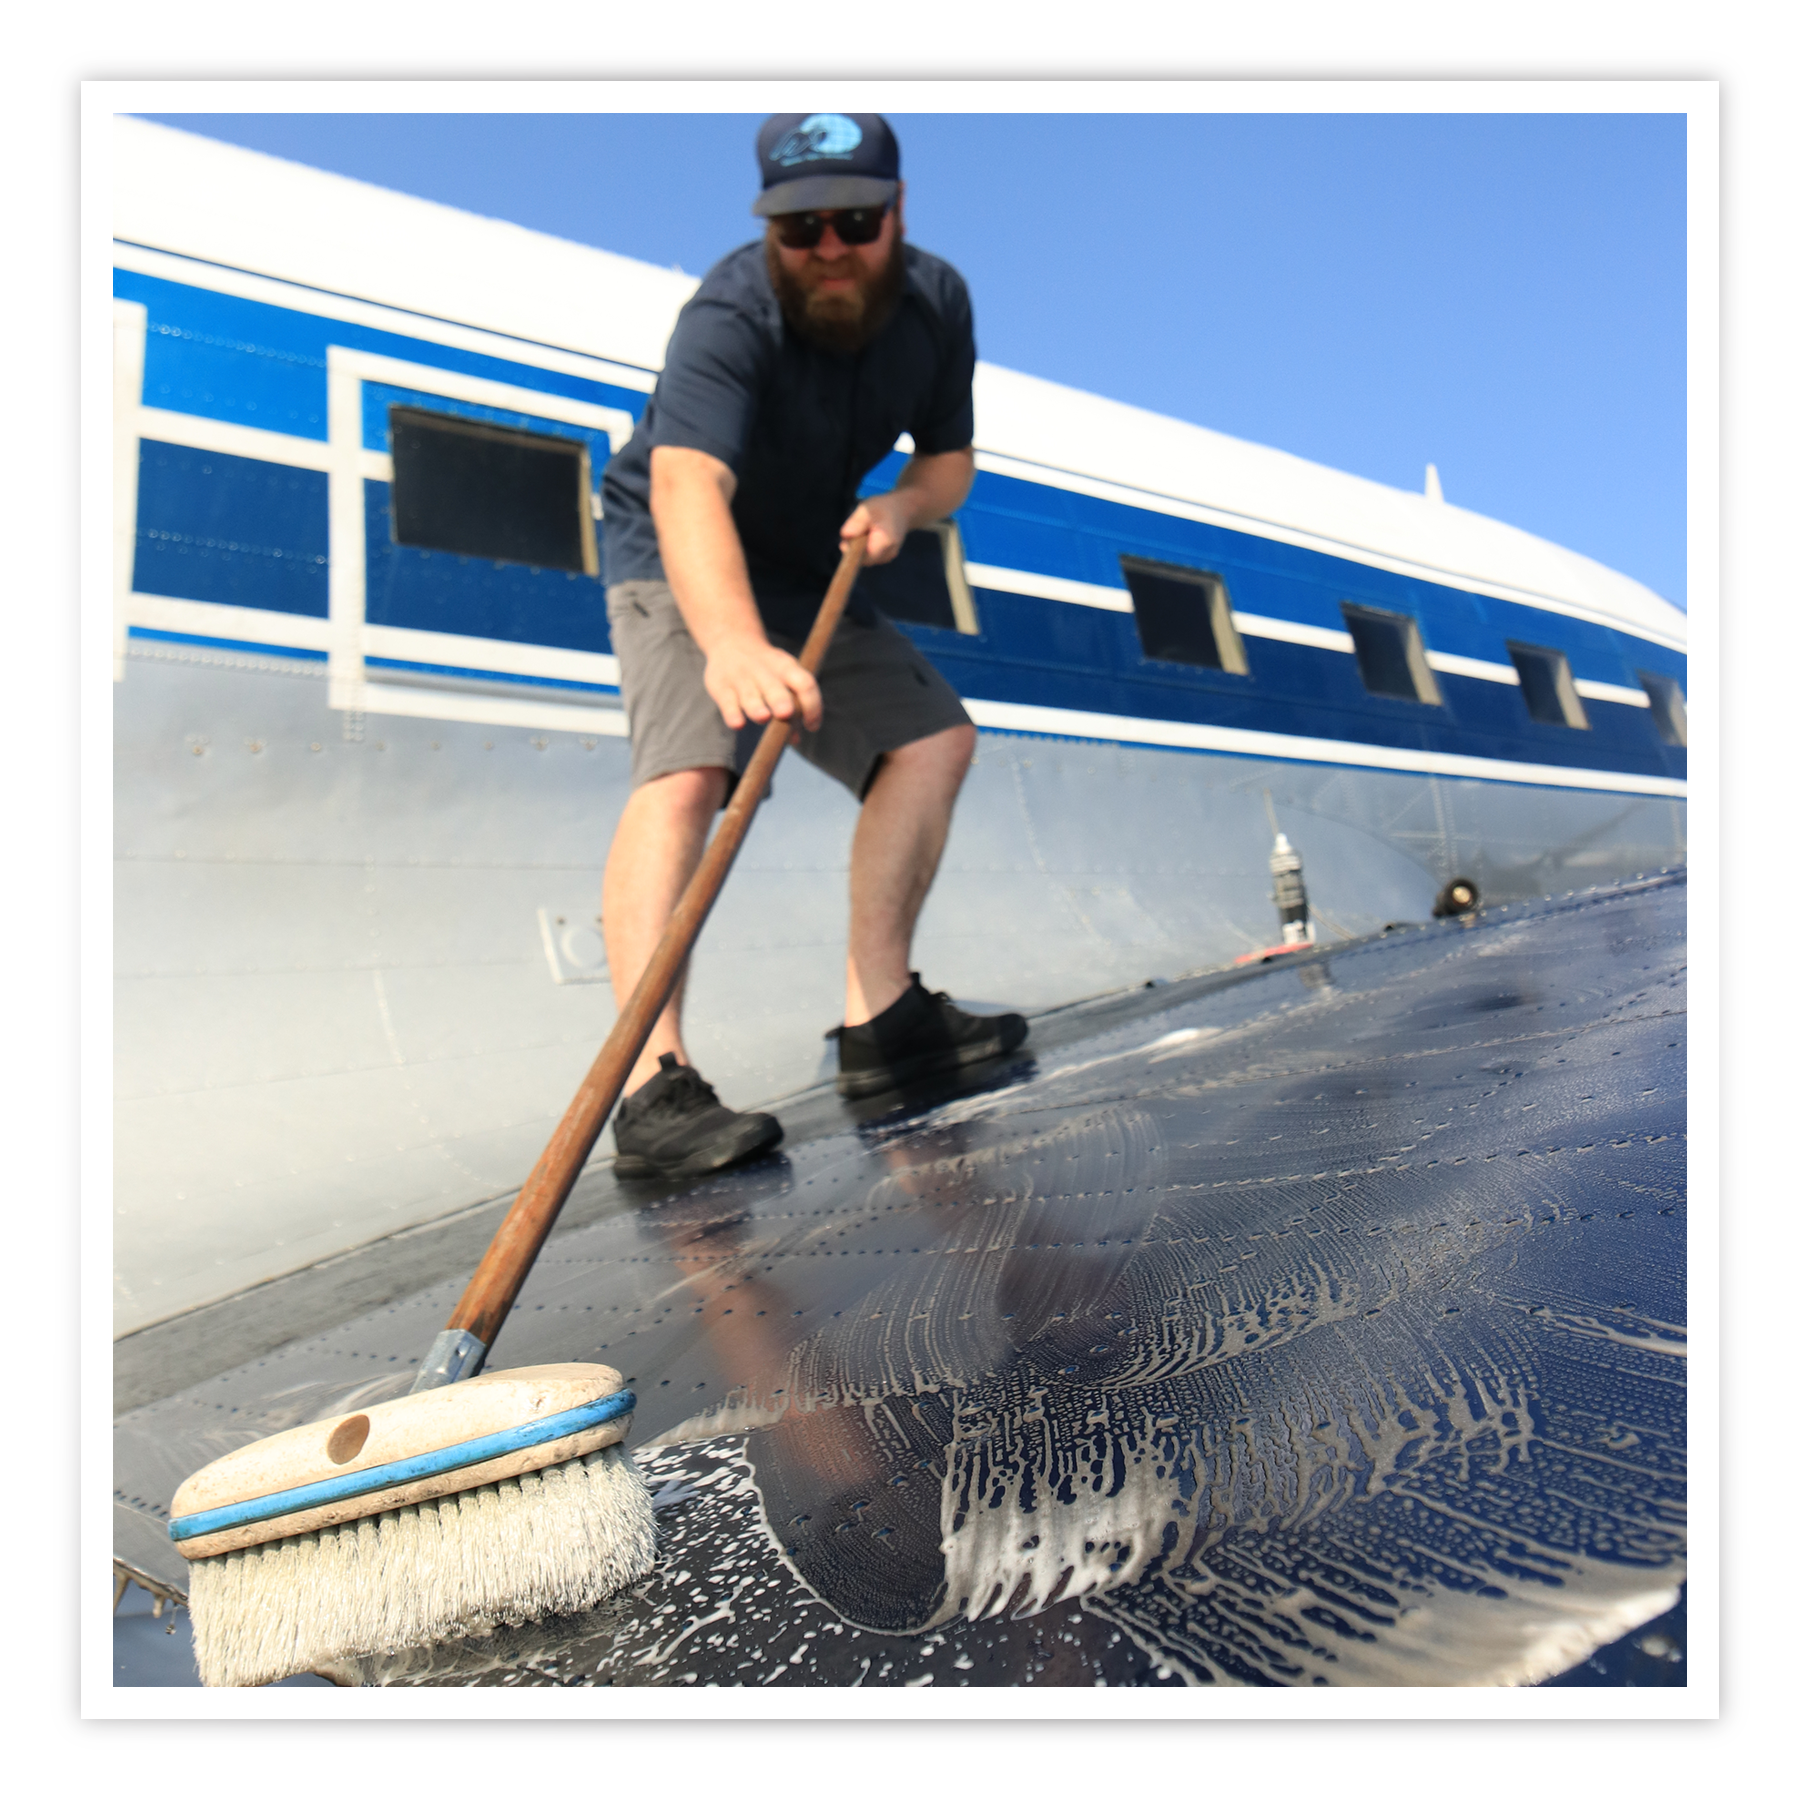 MFI Maintenance Specialist, Drew Aungst, cleans the DC-3 during a period of decreased flights.